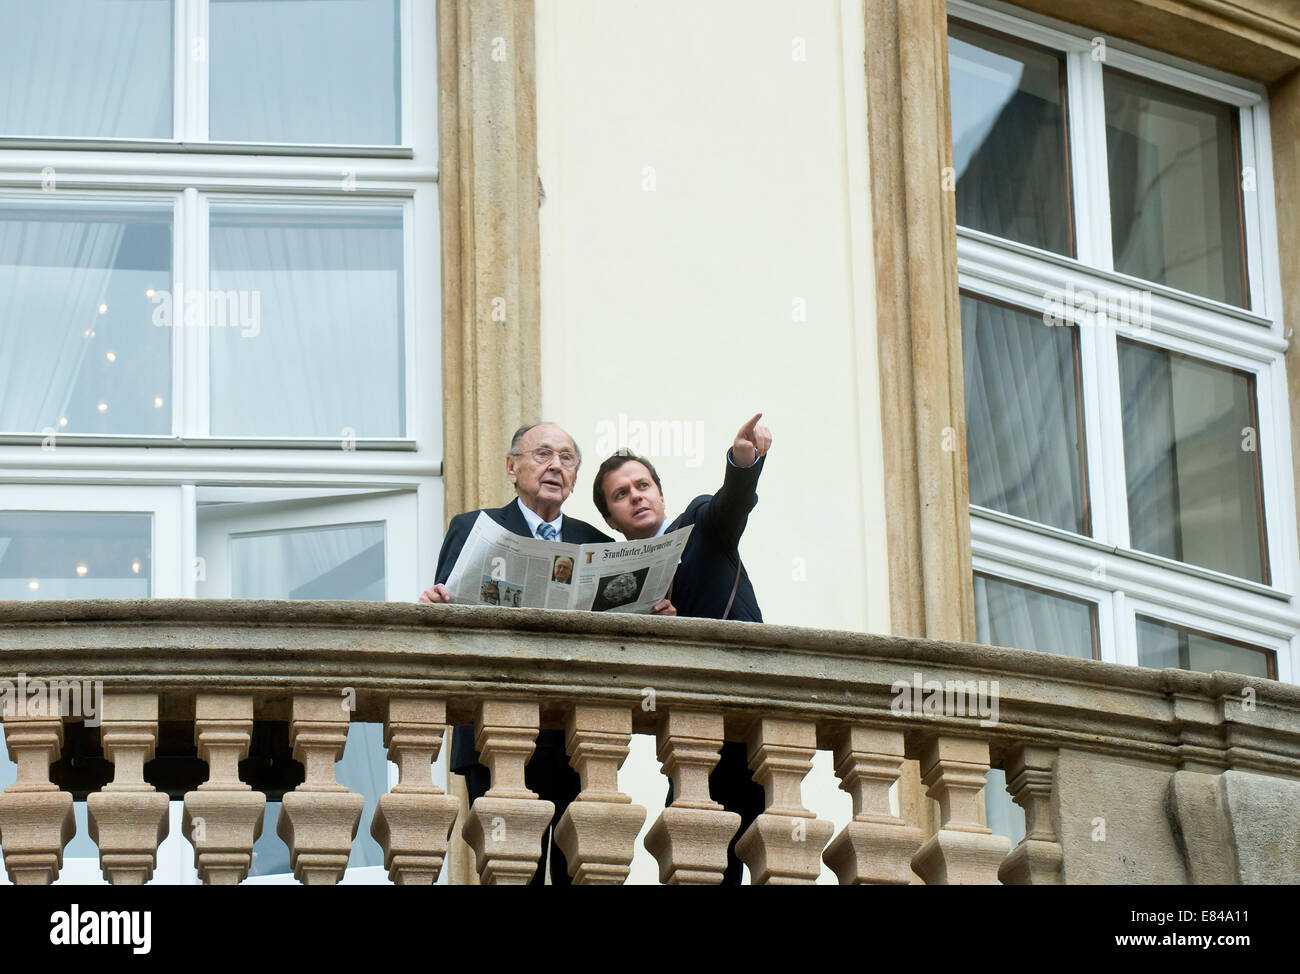 Prague, Czech Republic. 30th Sep, 2014. Former Foreign Minister and Vice Chancellor of Germany from 1974 to 1992 Hans-Dietrich Genscher (left) is seen at the balcony of the German embassy in Prague, Czech Republic, September 30, 2014. Hans-Dietrich Genscher attended the celebration of the 25th anniversary of the departure of thousands of refugees from Communist East Germany via the West German embassy in Prague to the West. © Vit Simanek/CTK Photo/Alamy Live News Stock Photo